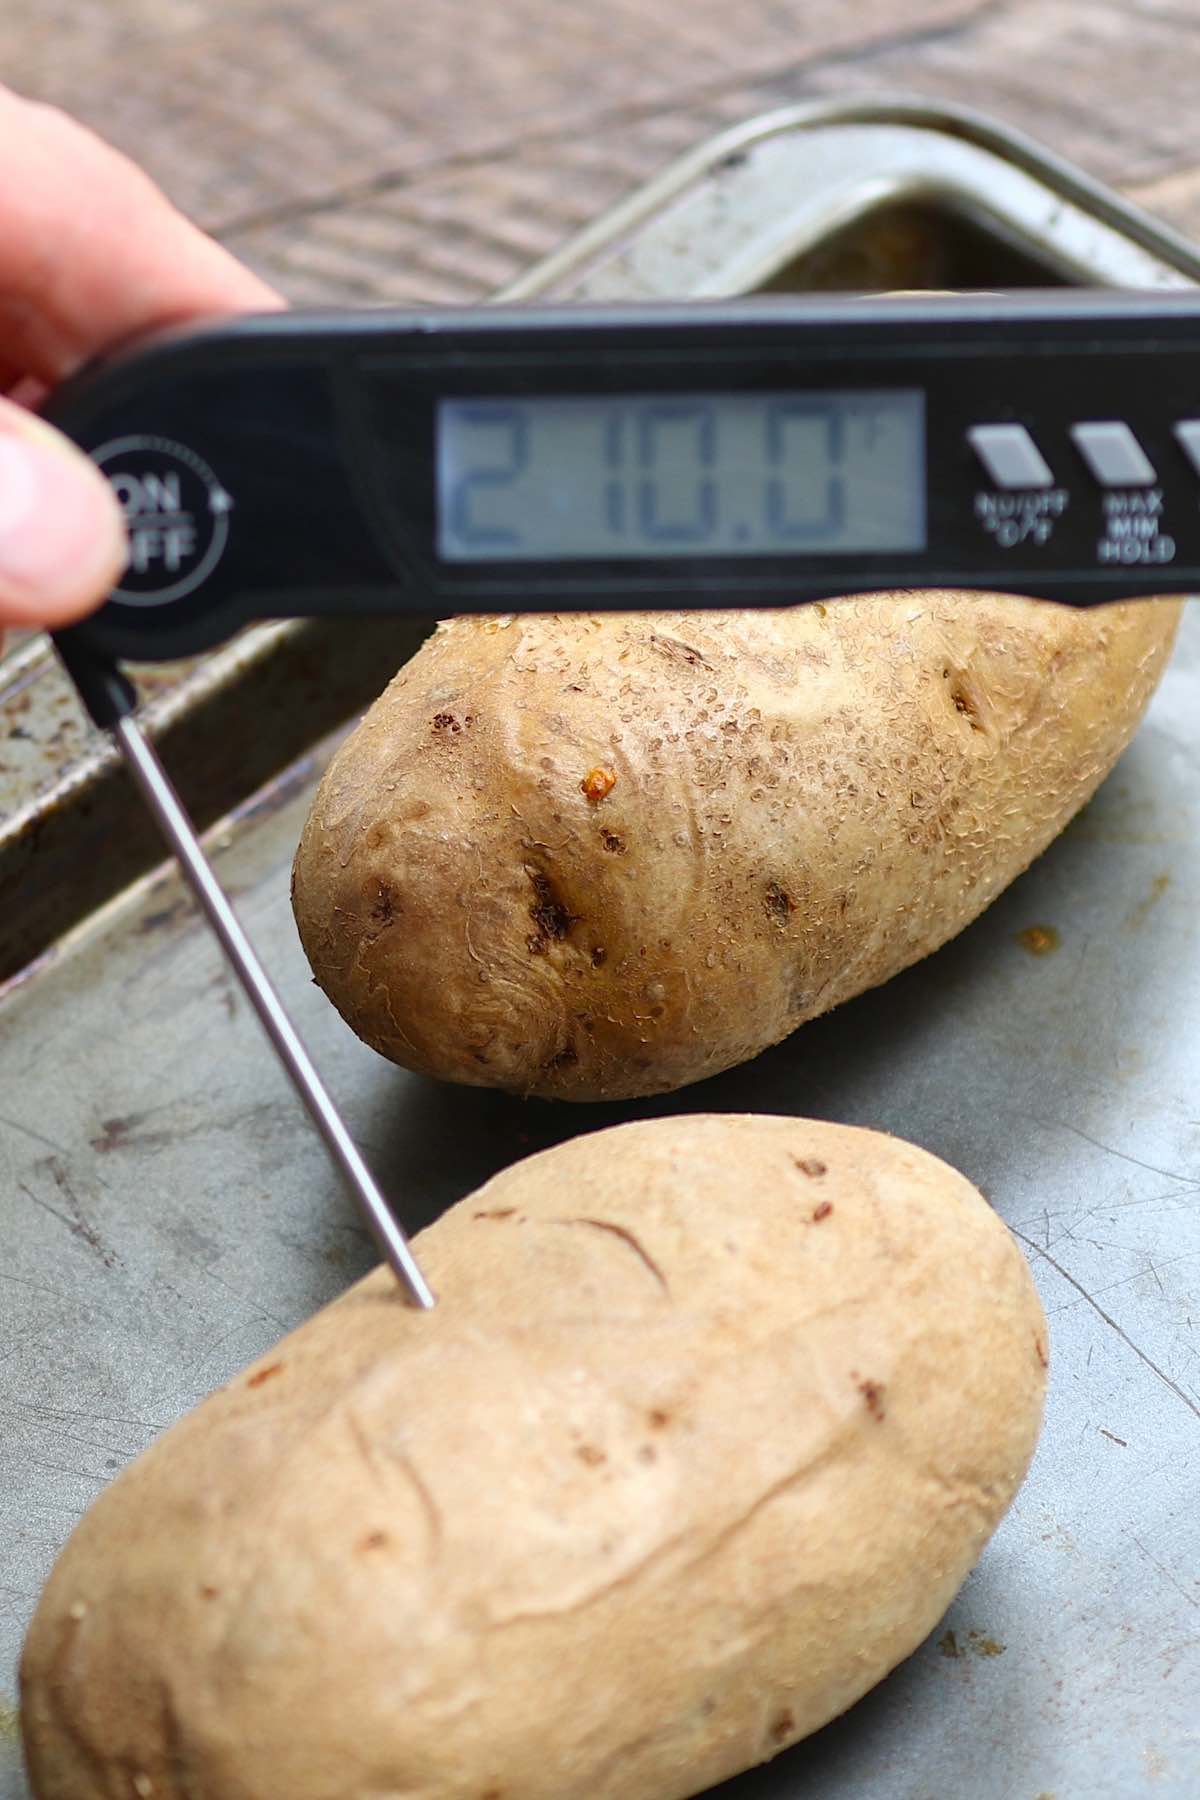 Inserting an instant-read thermometer into the middle of a potato to determine how long to bake a potato. It's done at 210 degrees F.